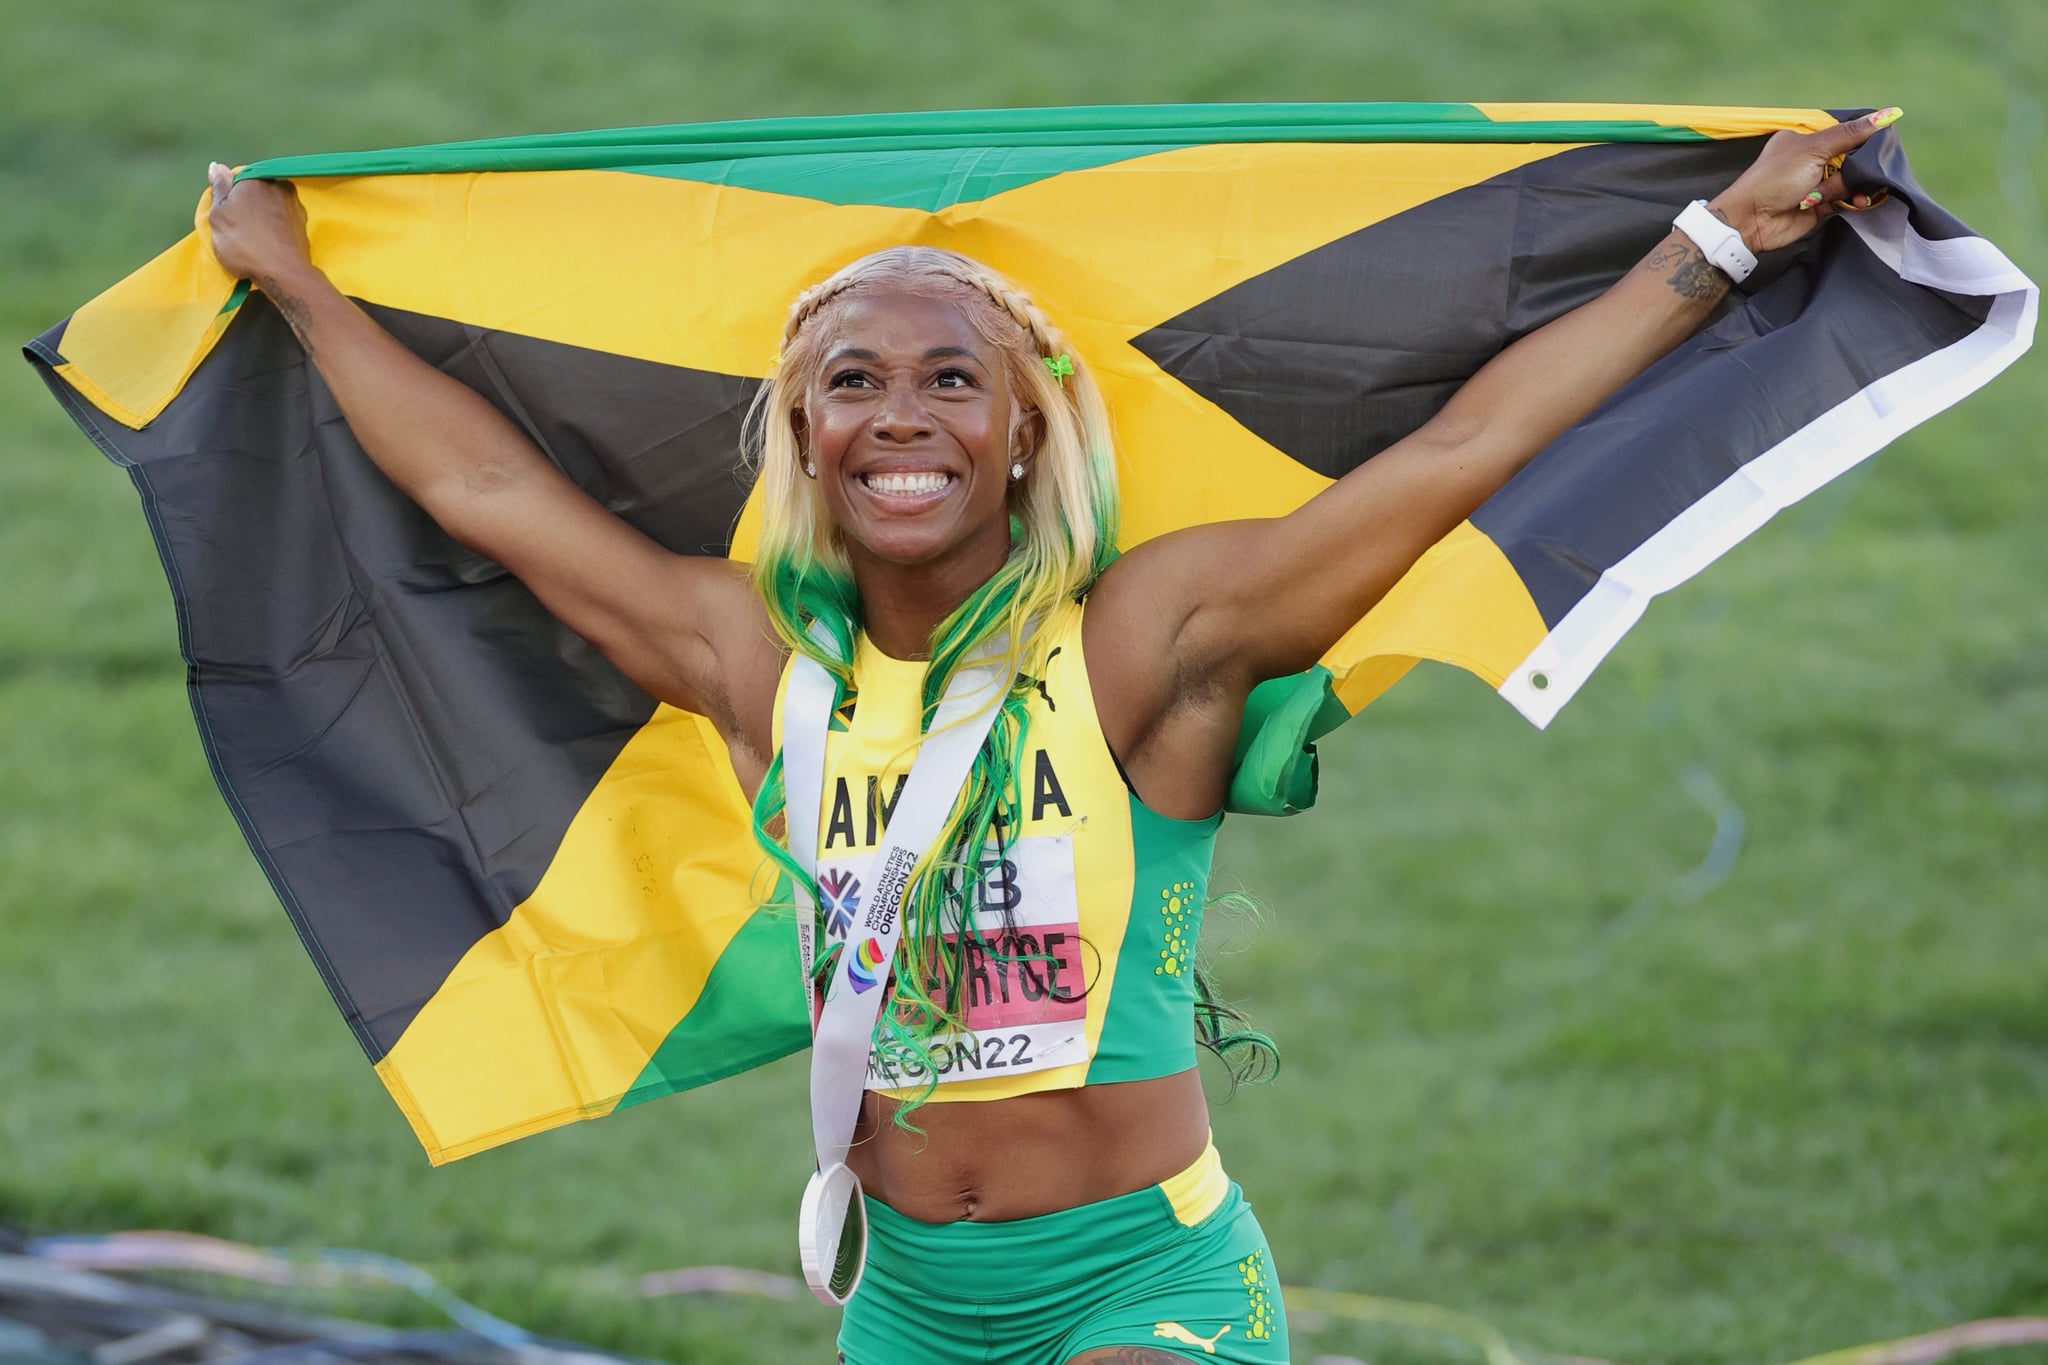 EUGENE, OREGON - JULY 17: Shelly-Ann Fraser-Pryce of Team Jamaica celebrates after winning gold the Women's 100m Final on day three of the World Athletics Championships Oregon22 at Hayward Field on July 17, 2022 in Eugene, Oregon. (Photo by Carmen Mandato/Getty Images)